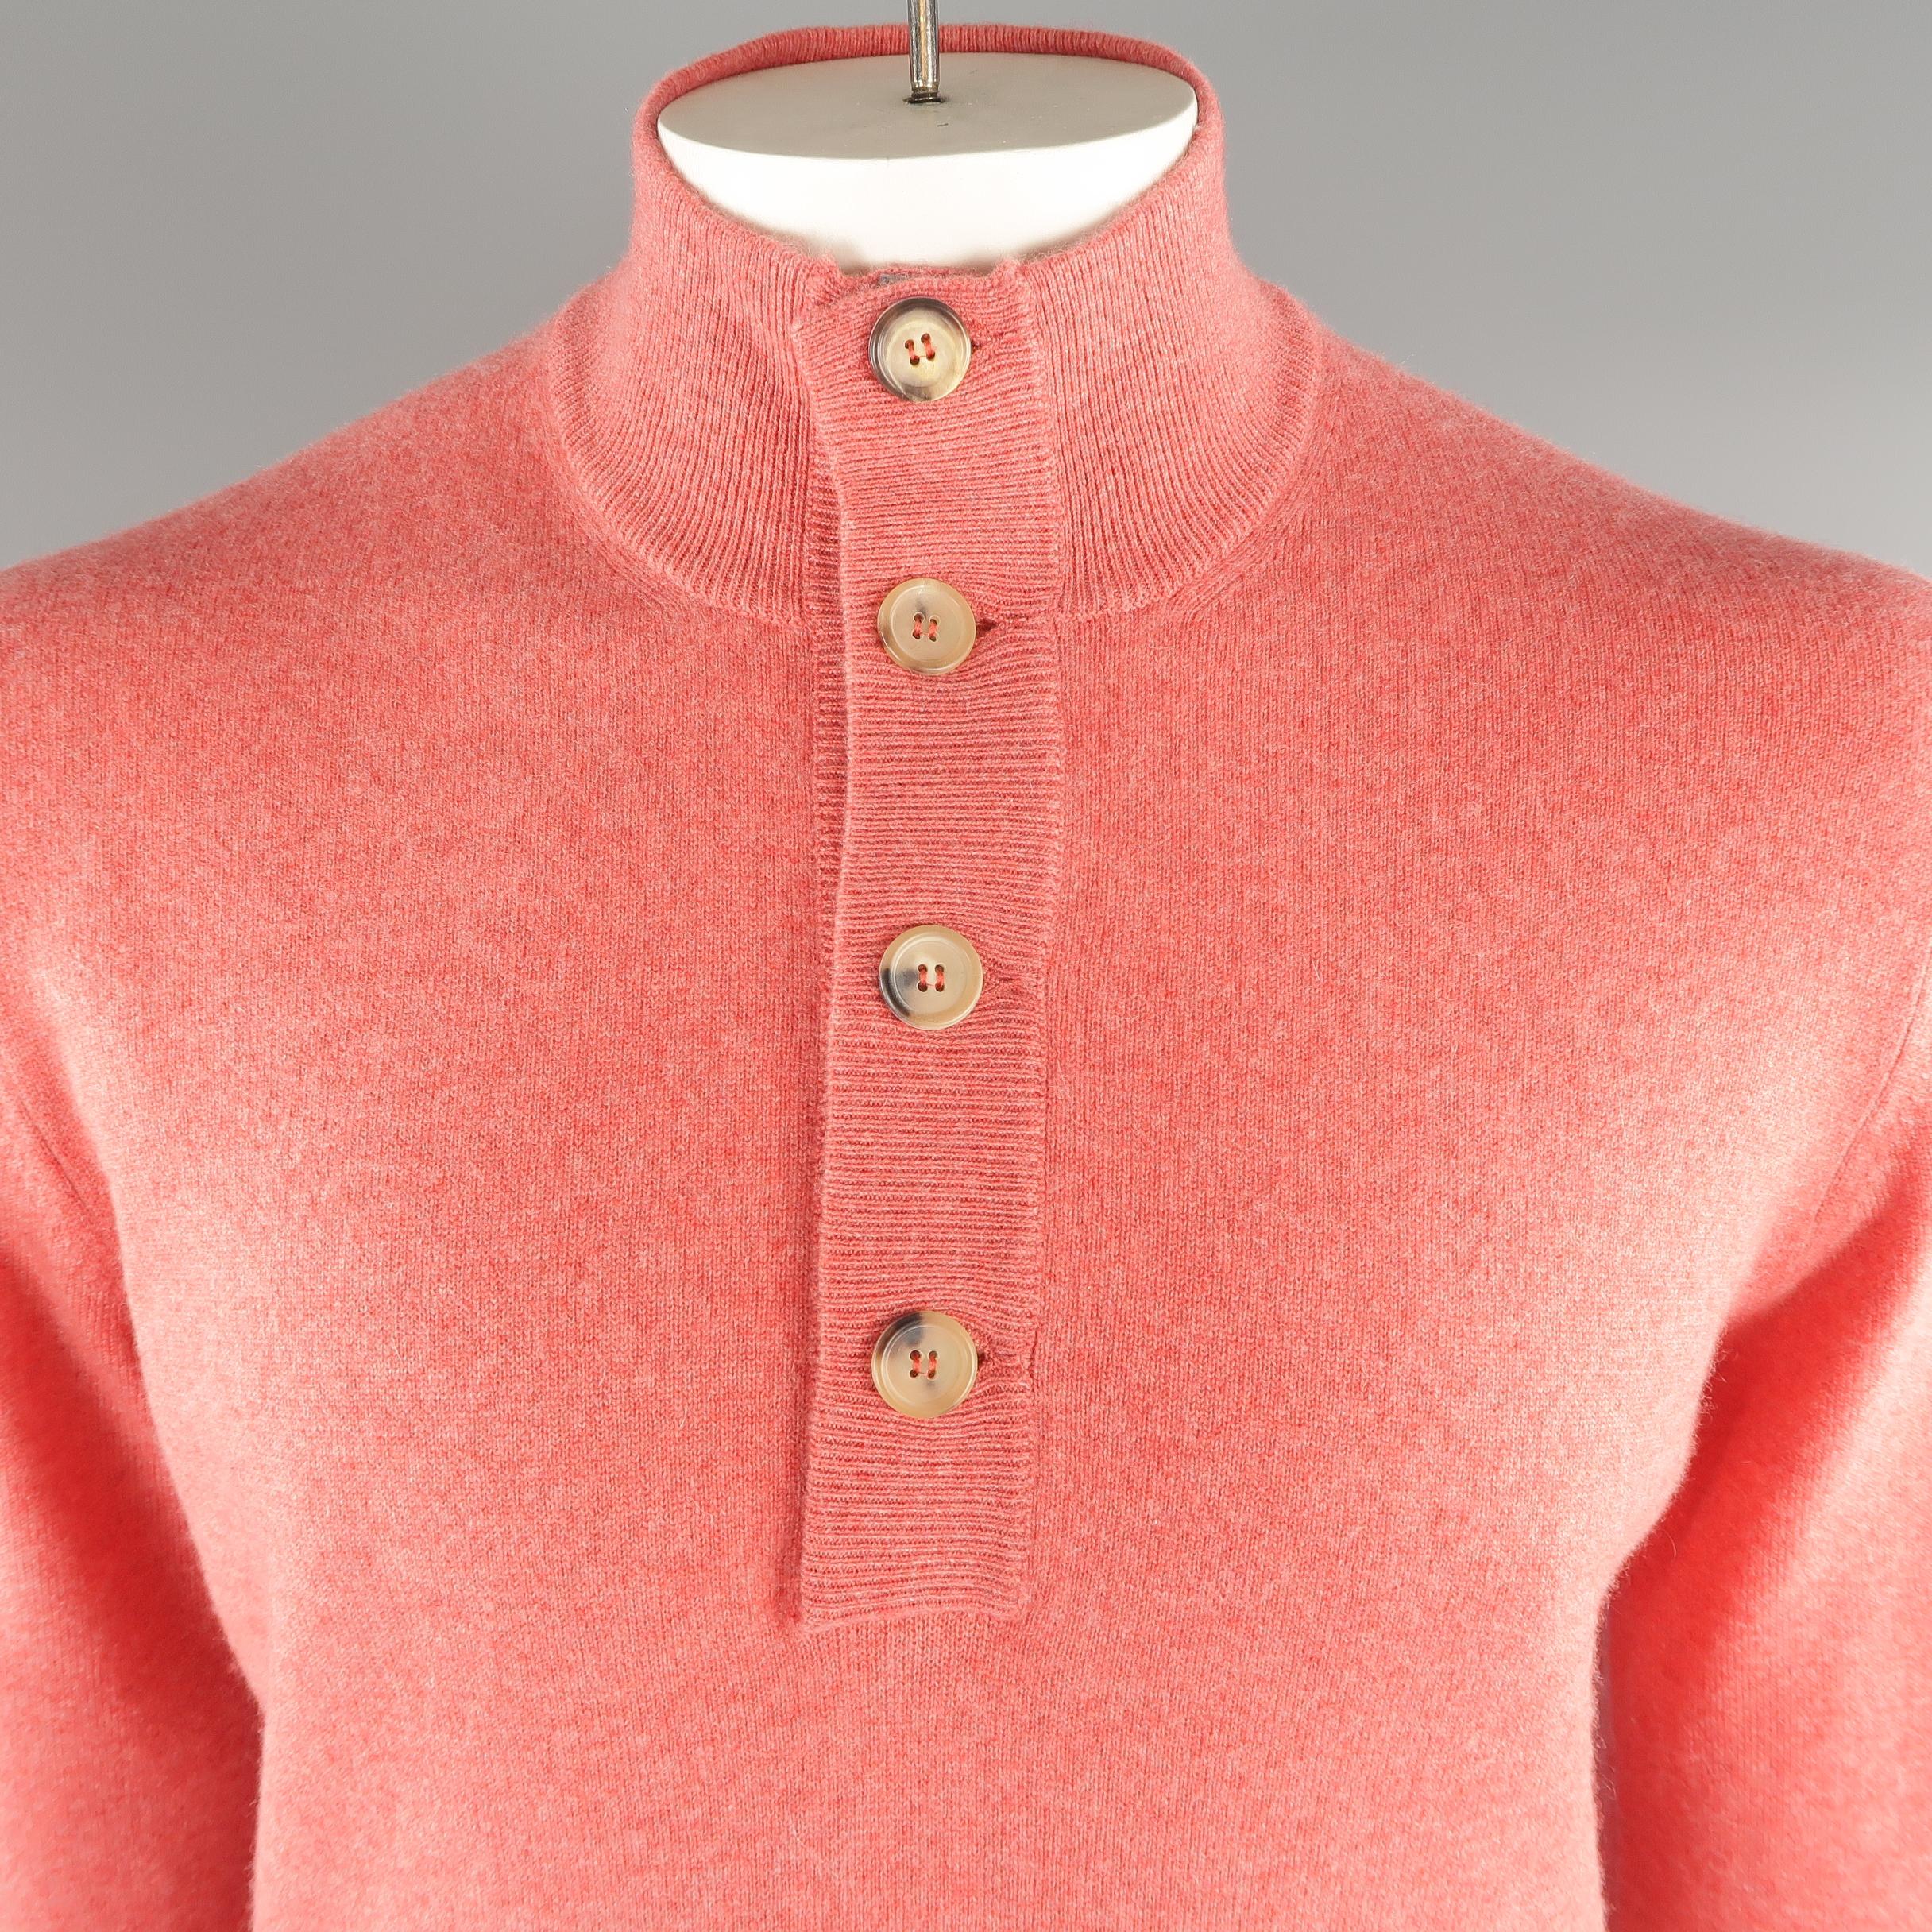 BRUNELLO CUCINELLI henley sweater come in 100% cashmere in a salmon tone, knitted, with front pockets, ribbed cuffs and waistband.  Made in Italy.
 
Excellent Pre-Owned Condition.
Marked: 52 IT
 
Measurements:
 
Shoulder: 18 in.
Chest: 44